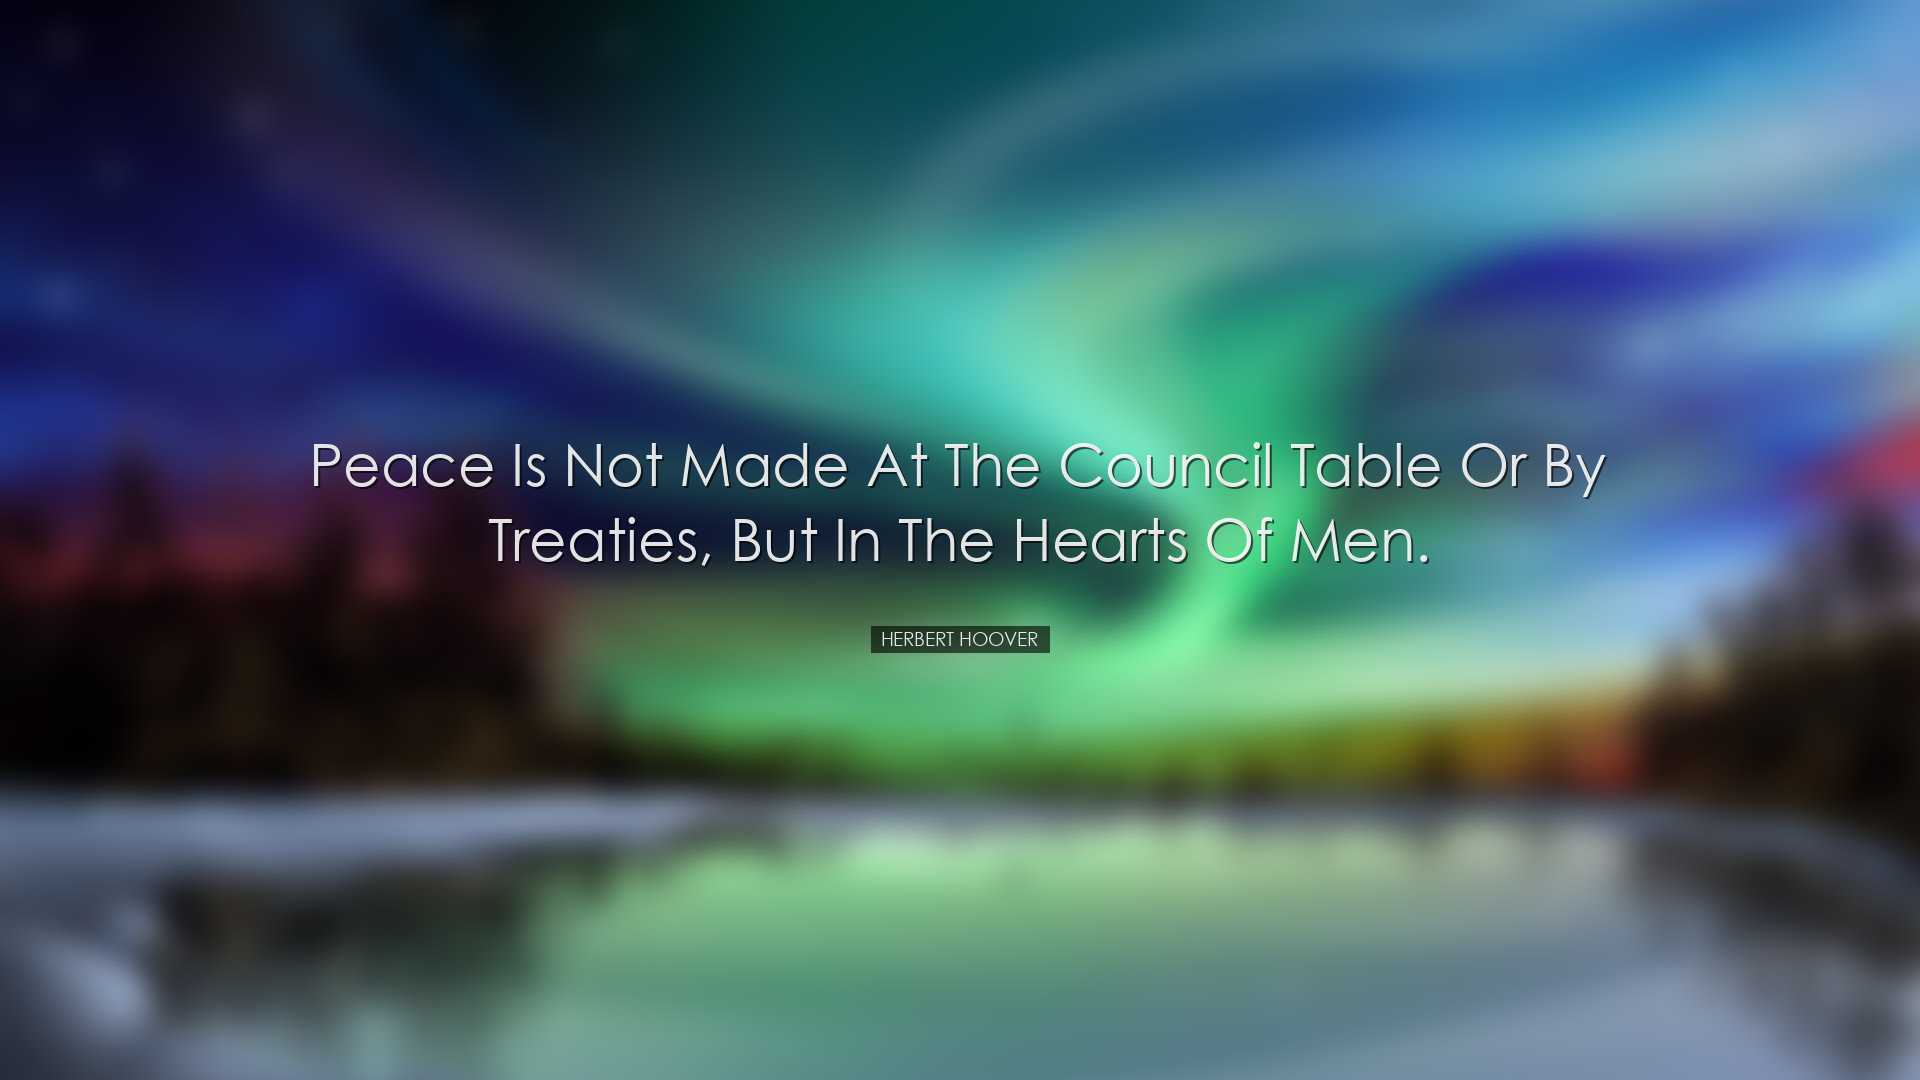 Peace is not made at the council table or by treaties, but in the